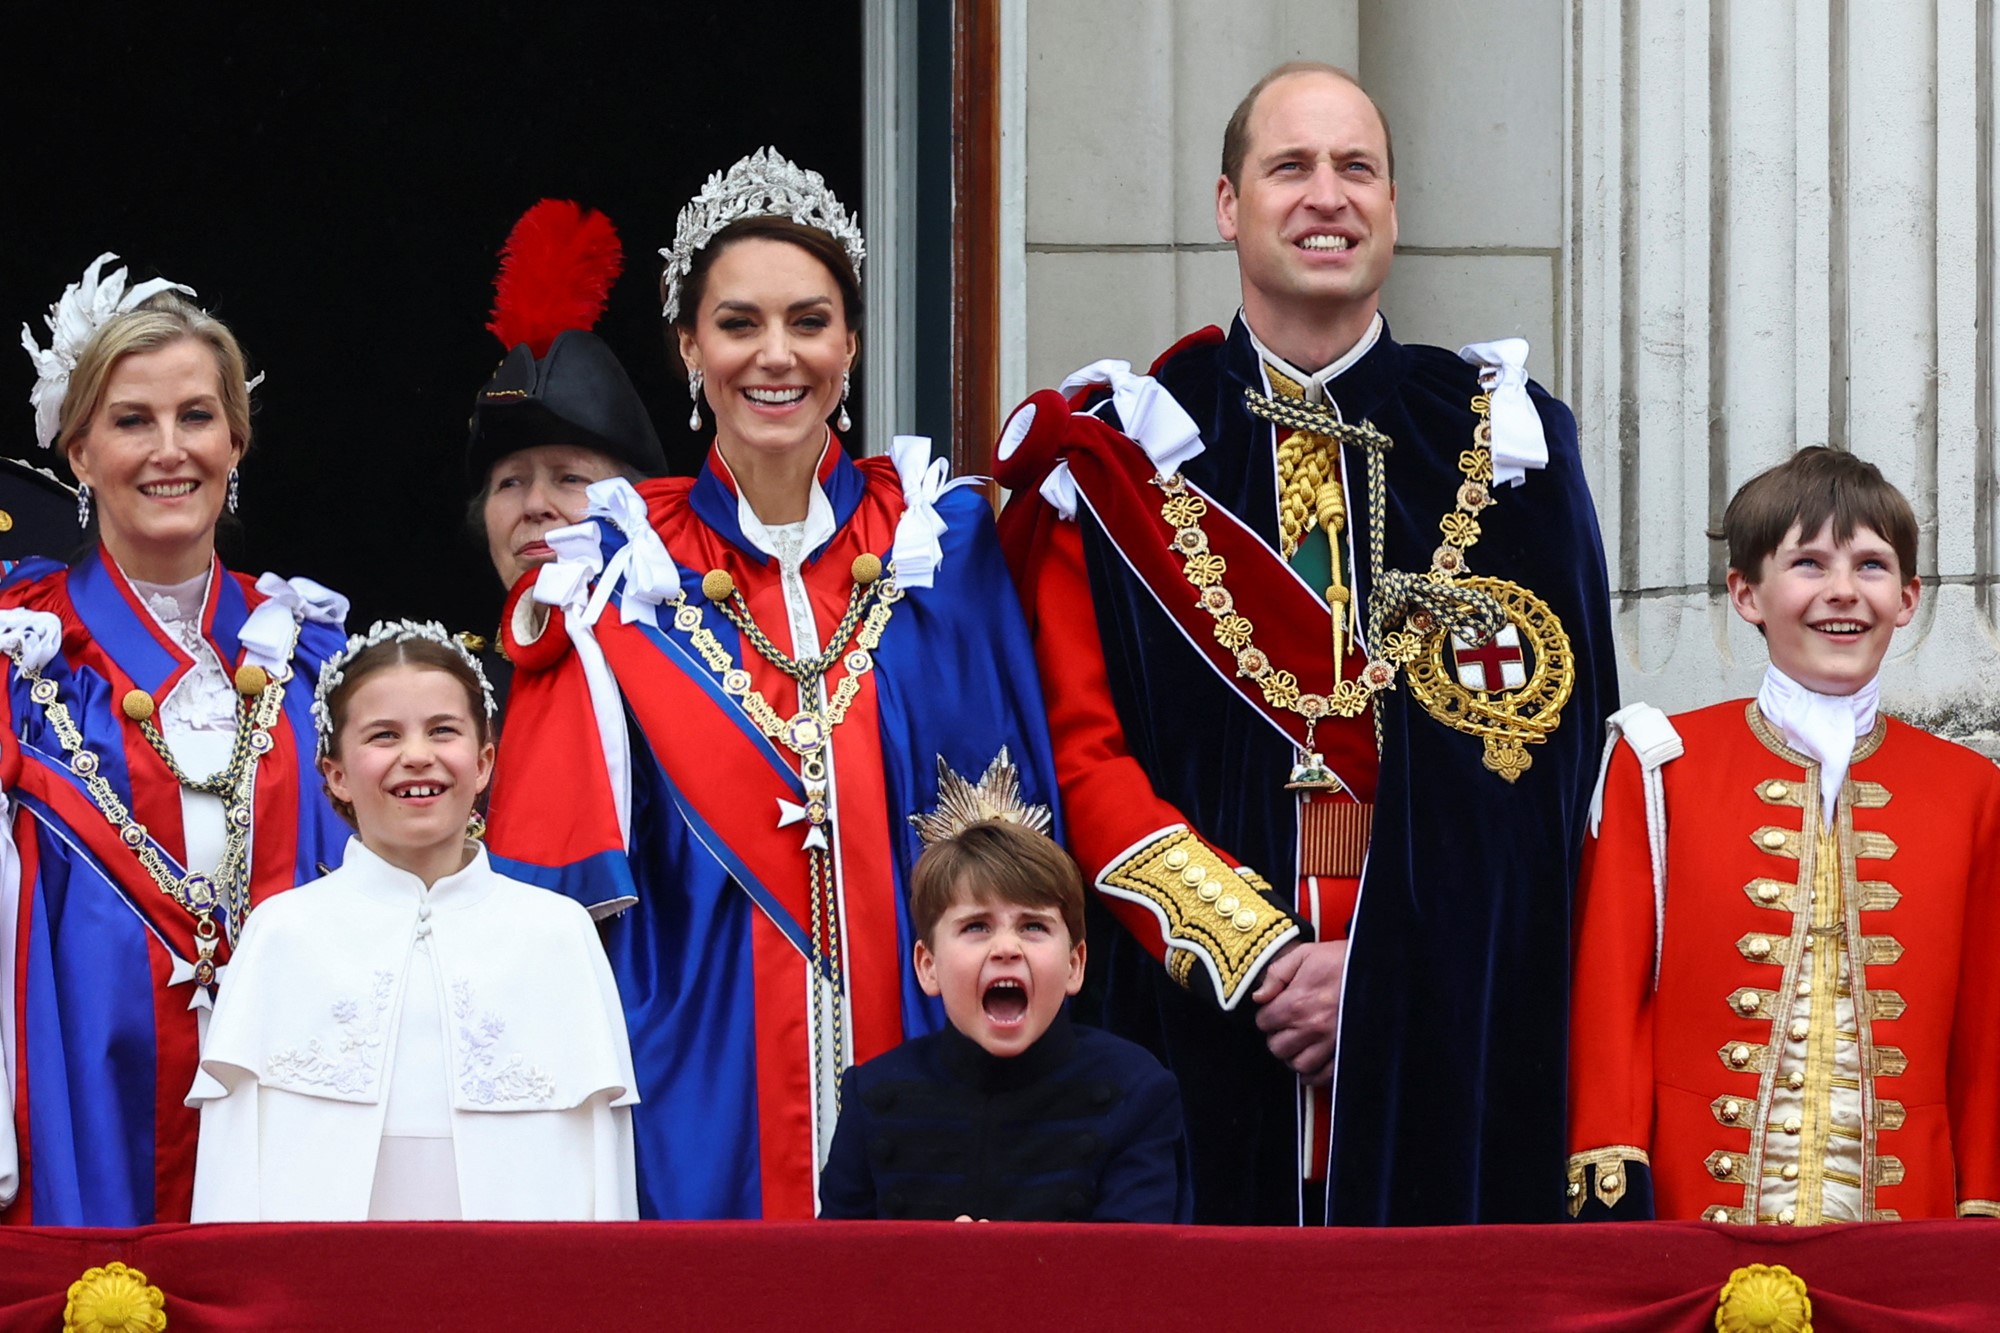 The royals smile on the balcony.